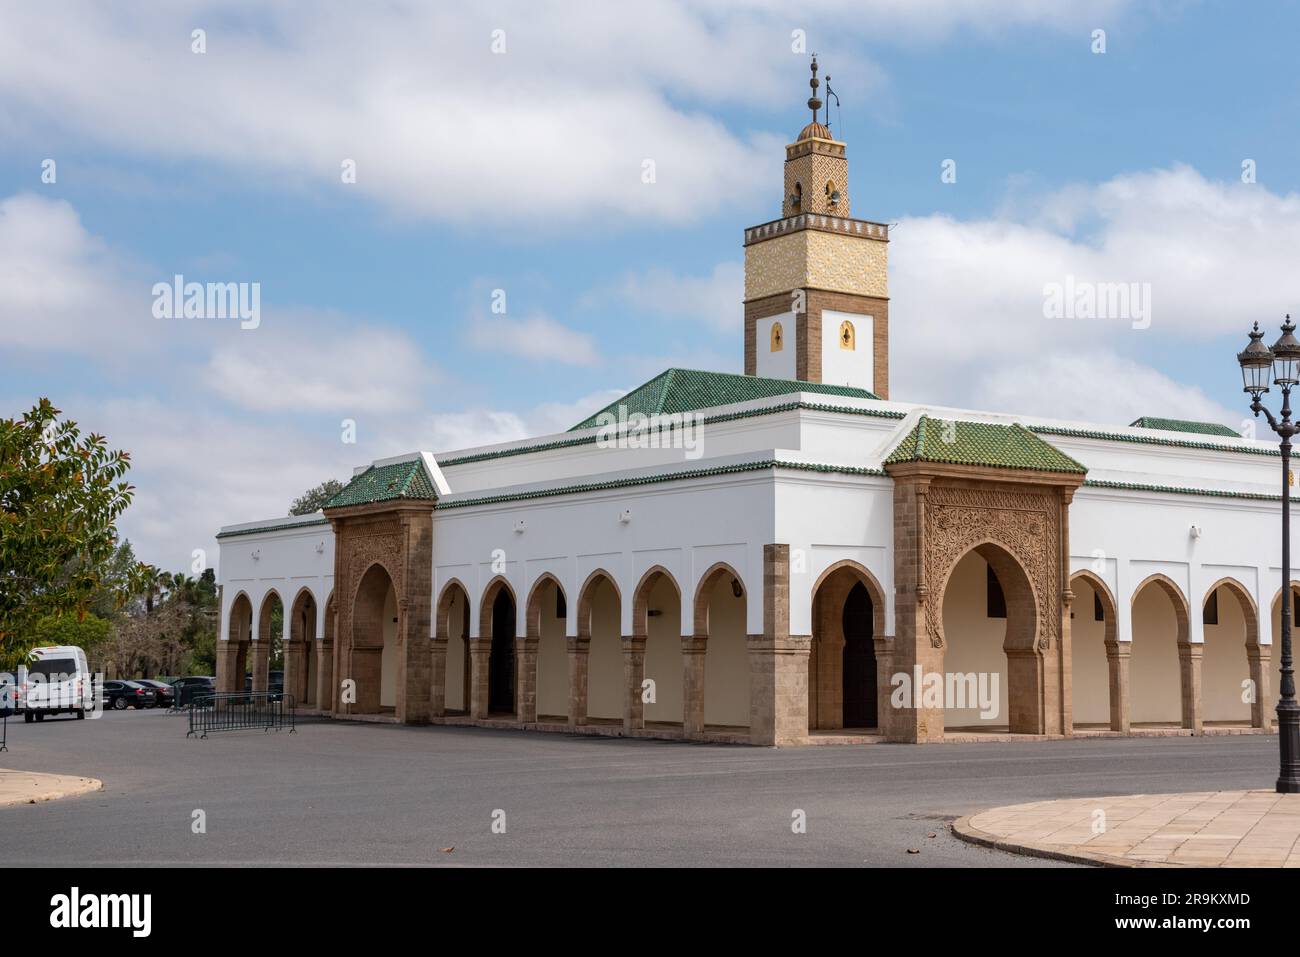 Royal Ahl Fas mosque near the king's palace in Rabat, Morocco Stock Photo